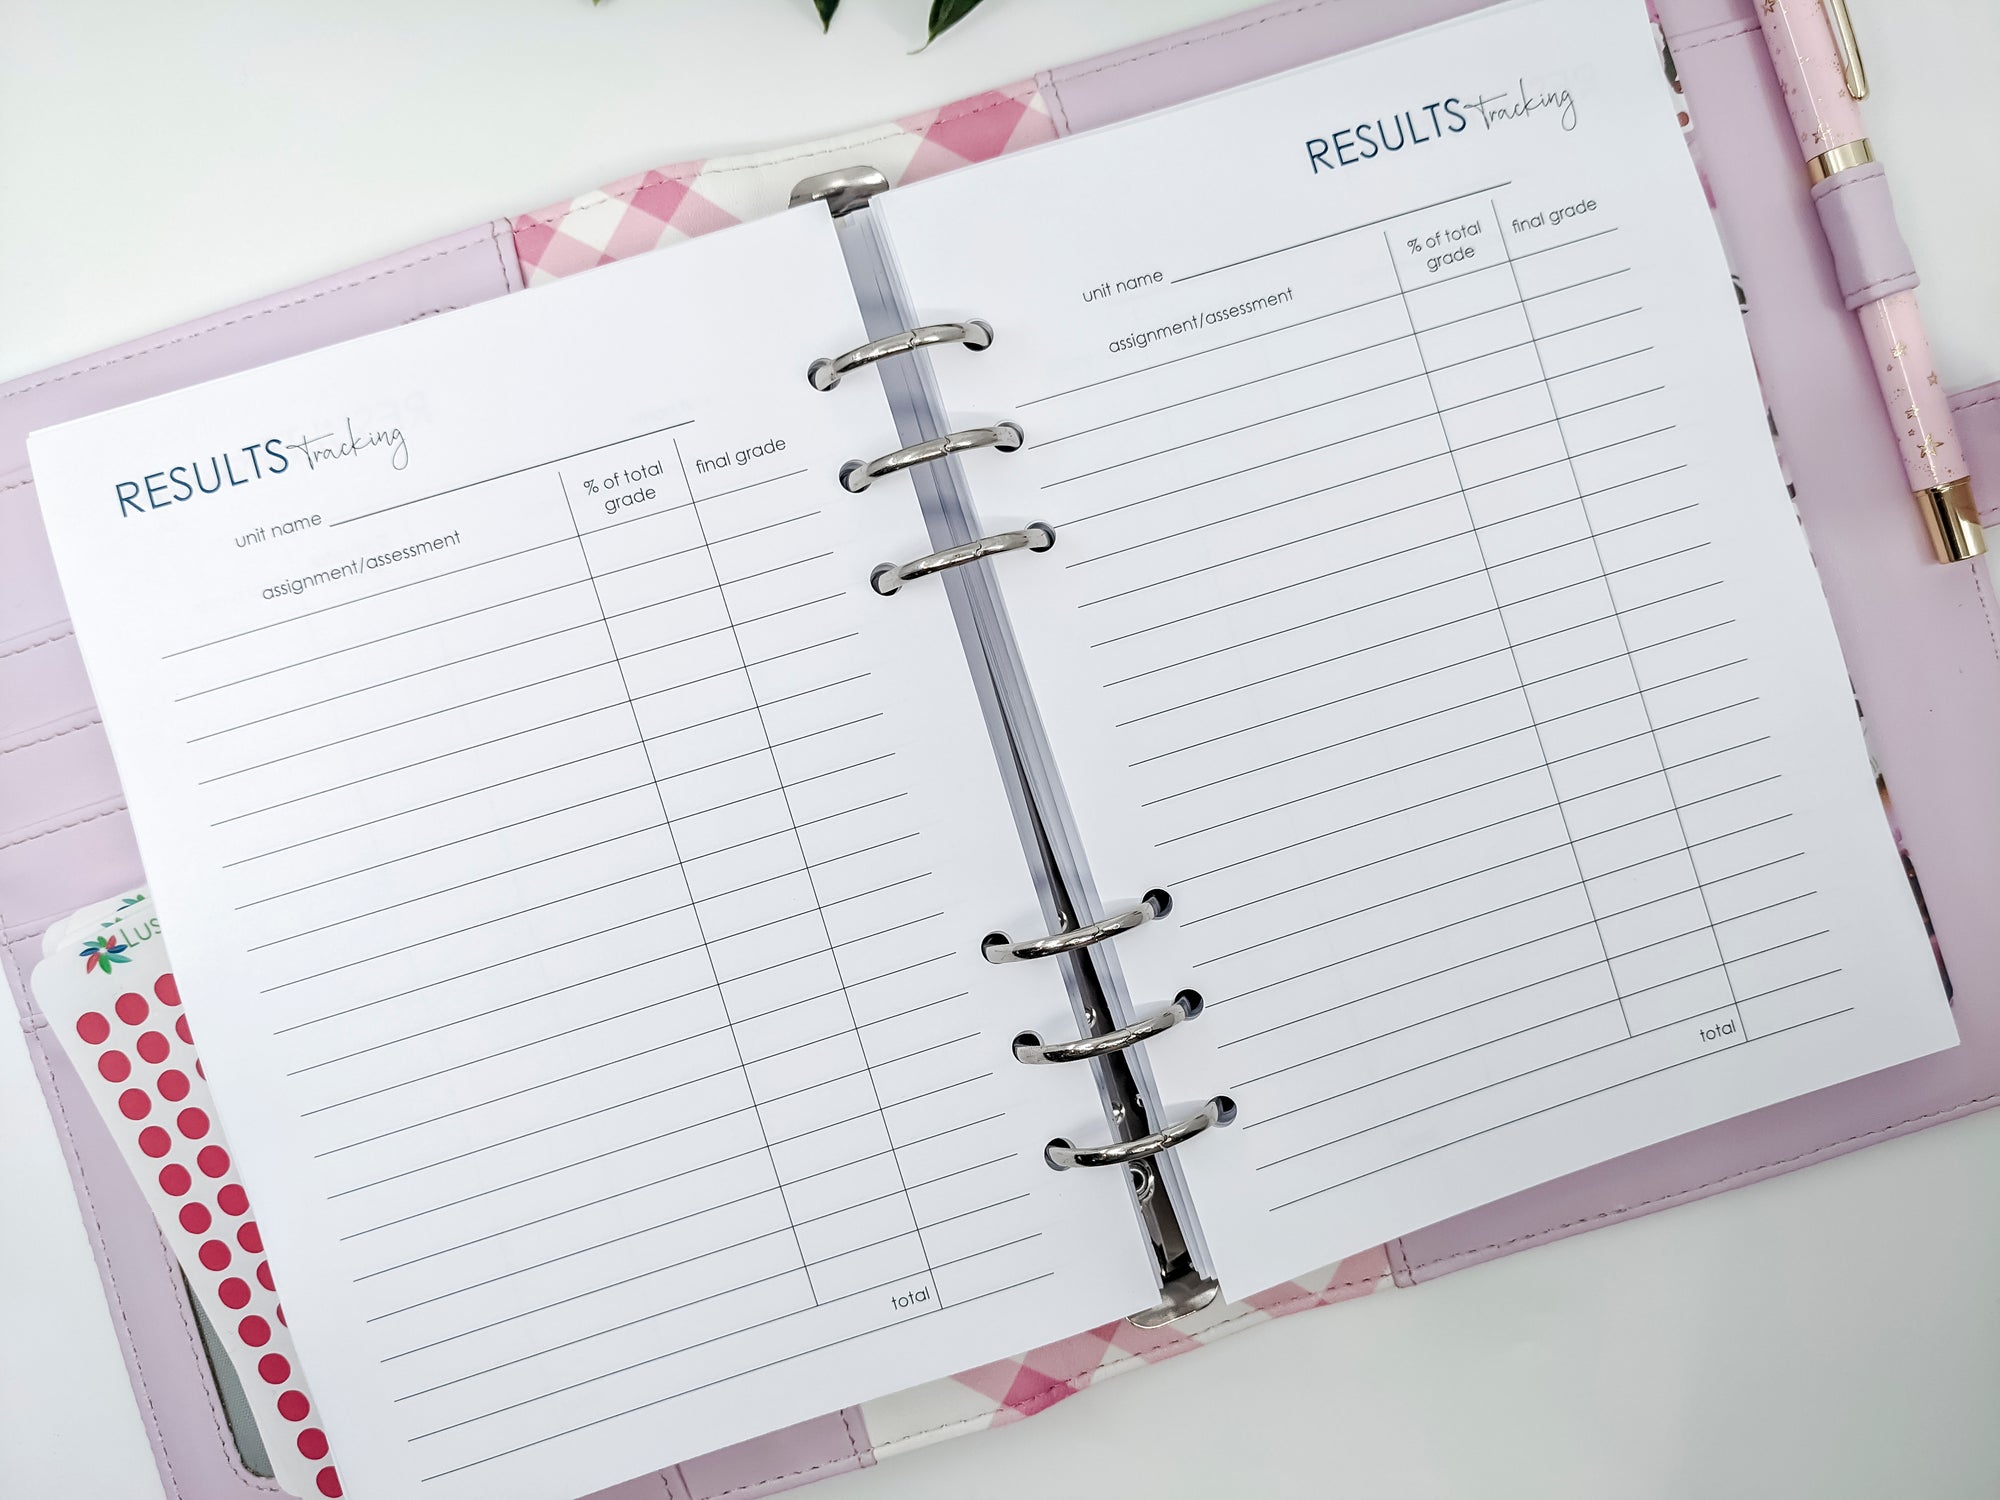 This study planner contains planner, dividers, weekly and monthly diary and more